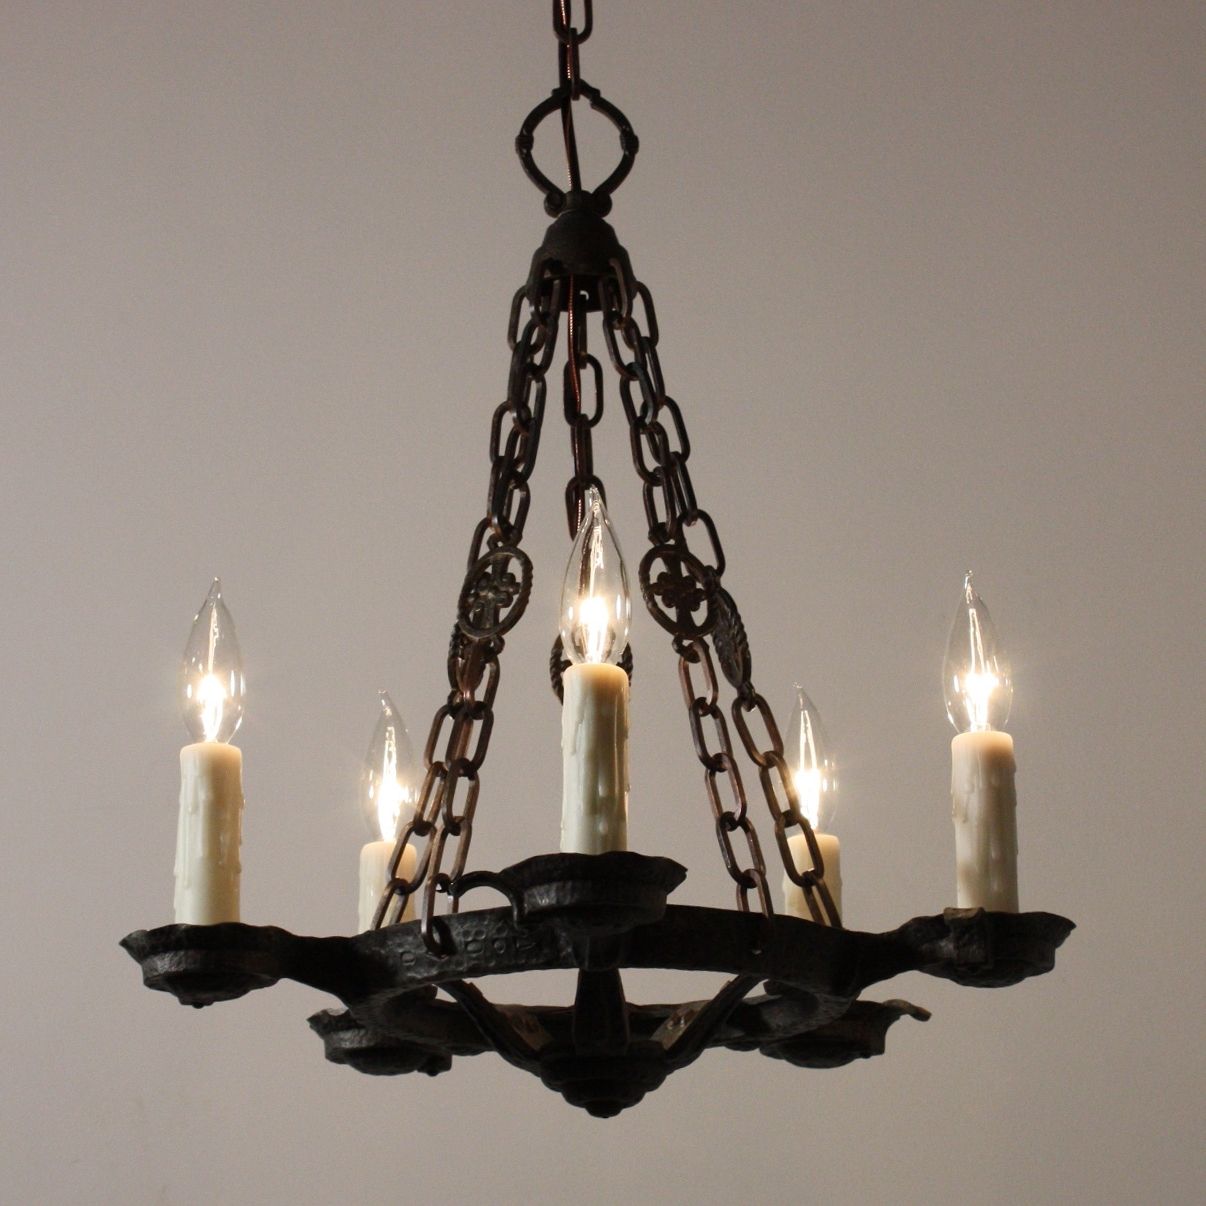 Most Recently Released Chandelier: Astonishing Cast Iron Chandelier Large Wrought Iron With Regard To Vintage Wrought Iron Chandelier (View 8 of 15)